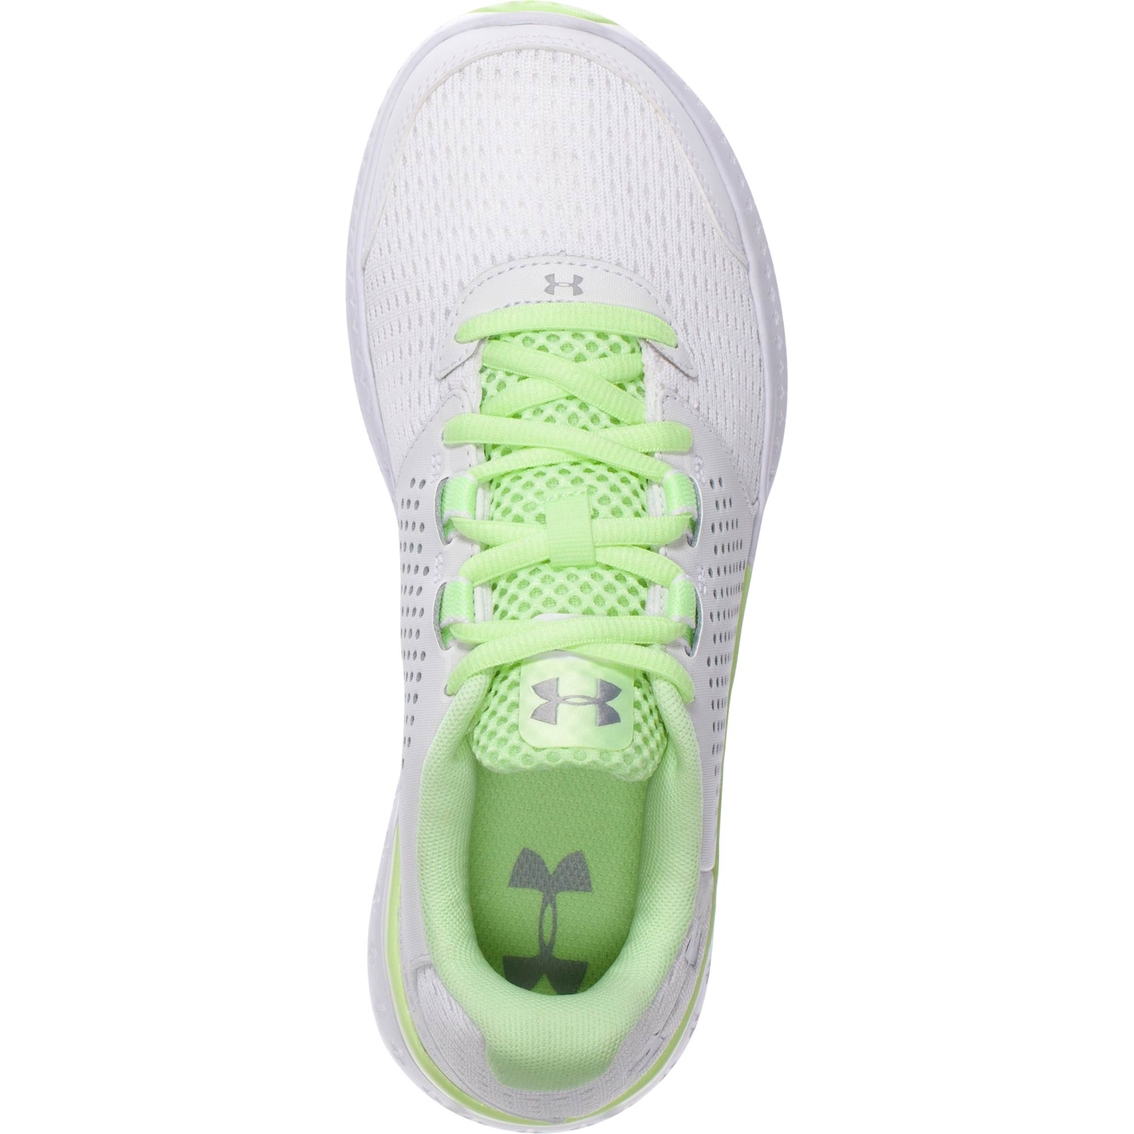 Under Armour Women's Micro G Running Shoes | Running | Shoes Shop Exchange